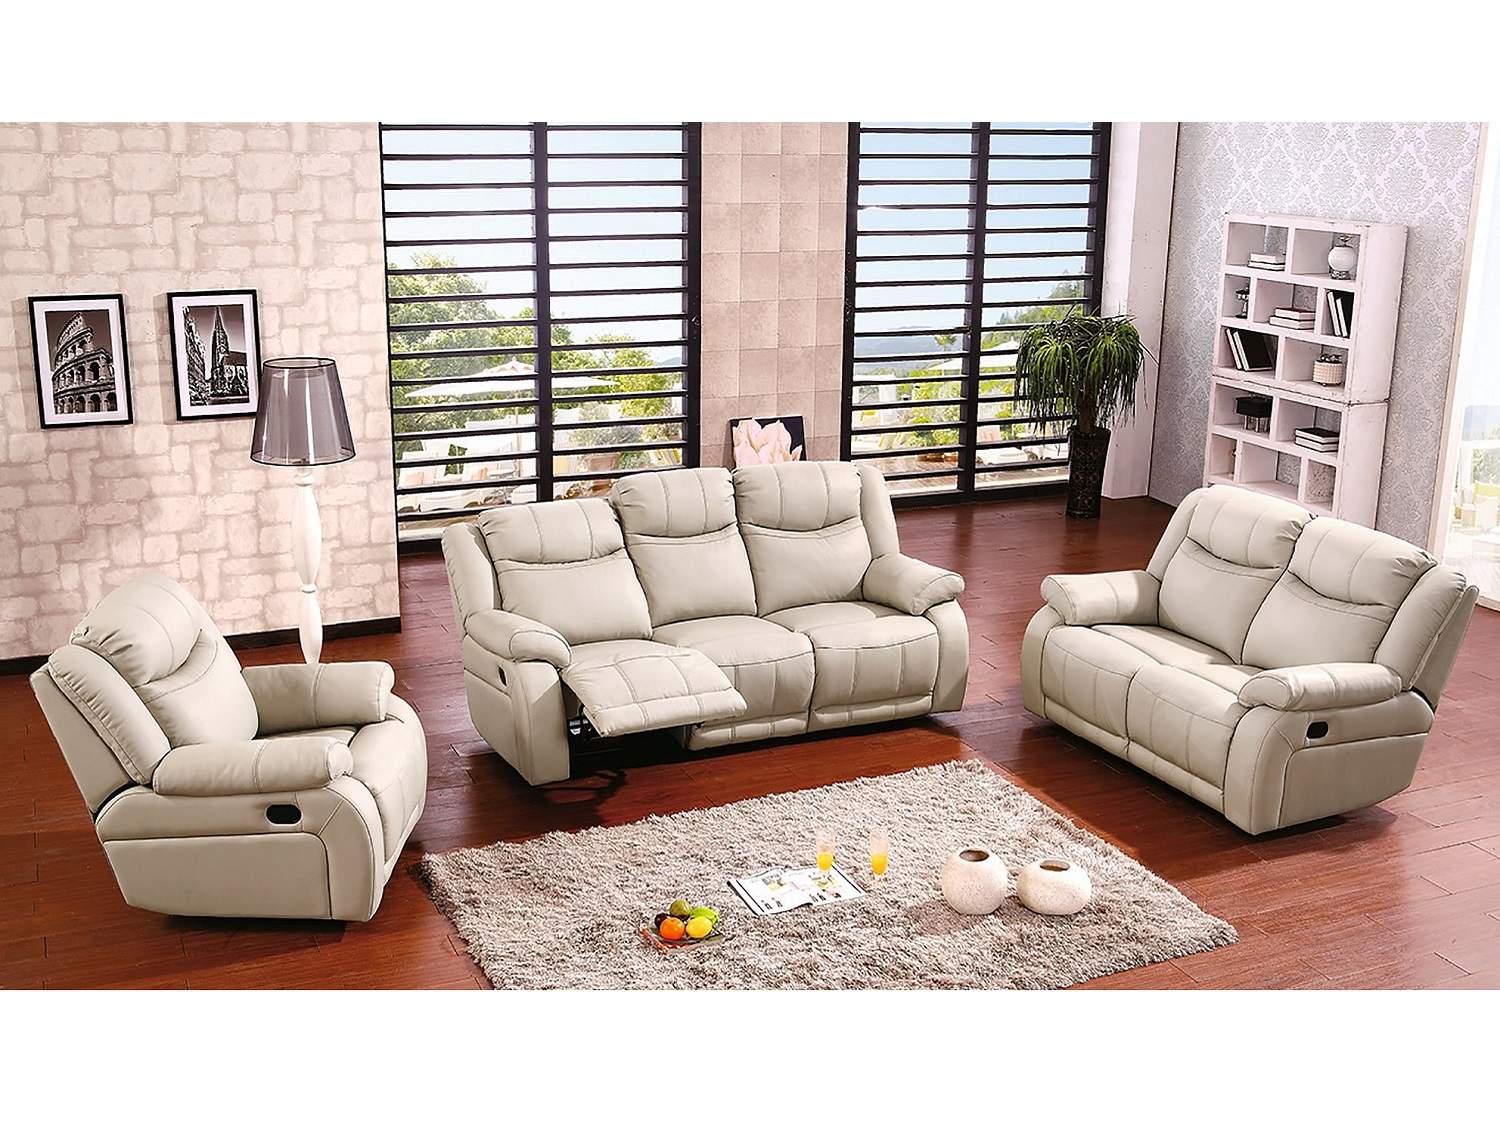 MALONE Leather Reclining Sofa, Love-seat & Arm Chair